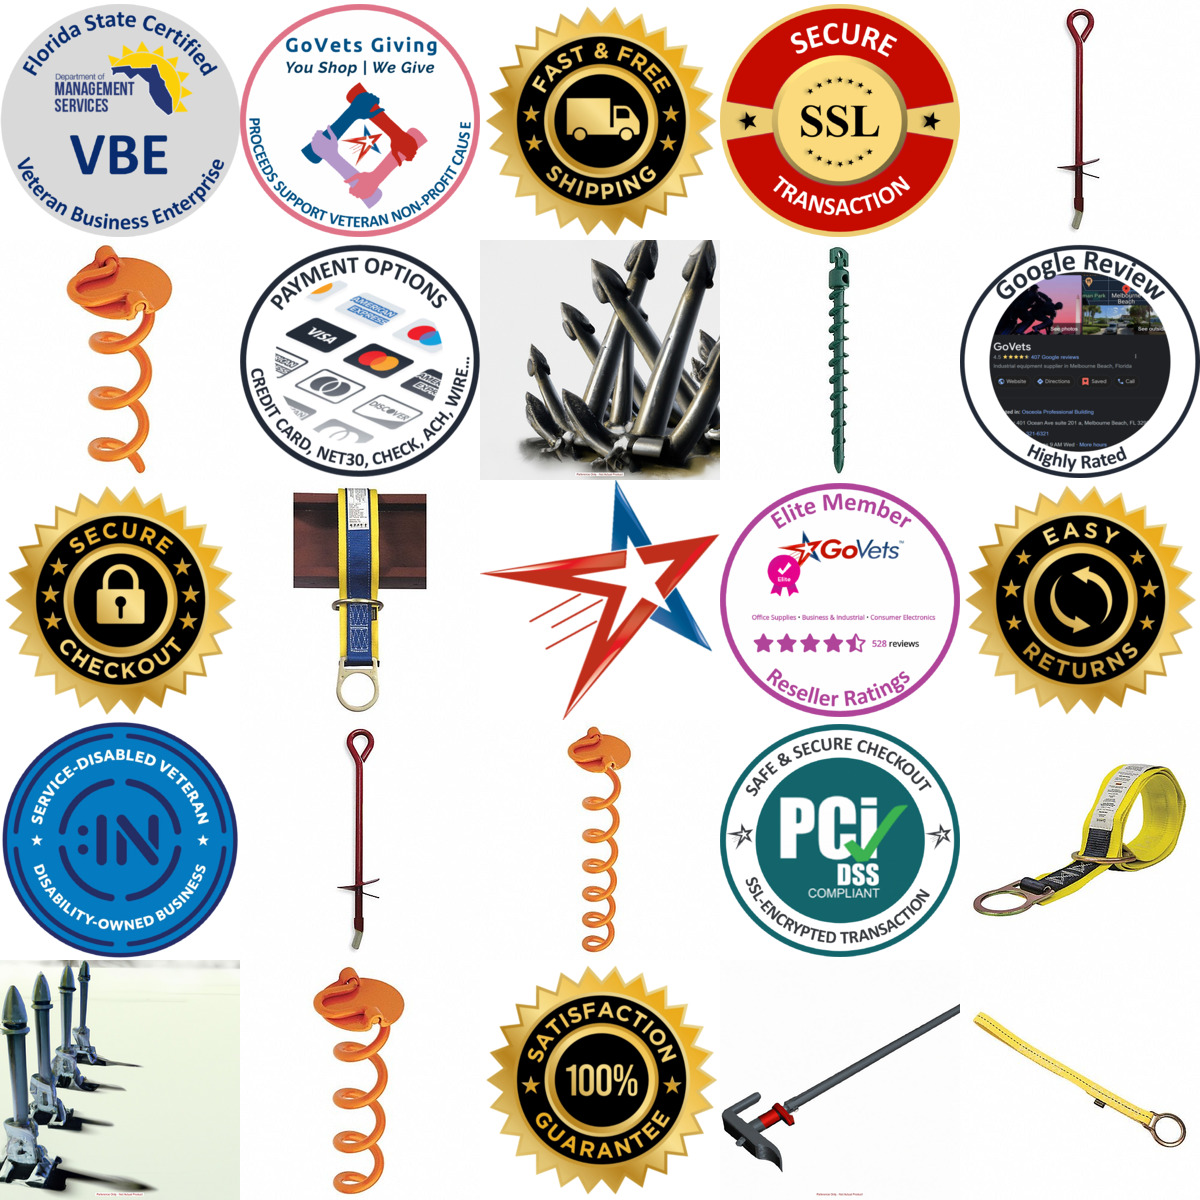 A selection of Earth Anchors products on GoVets